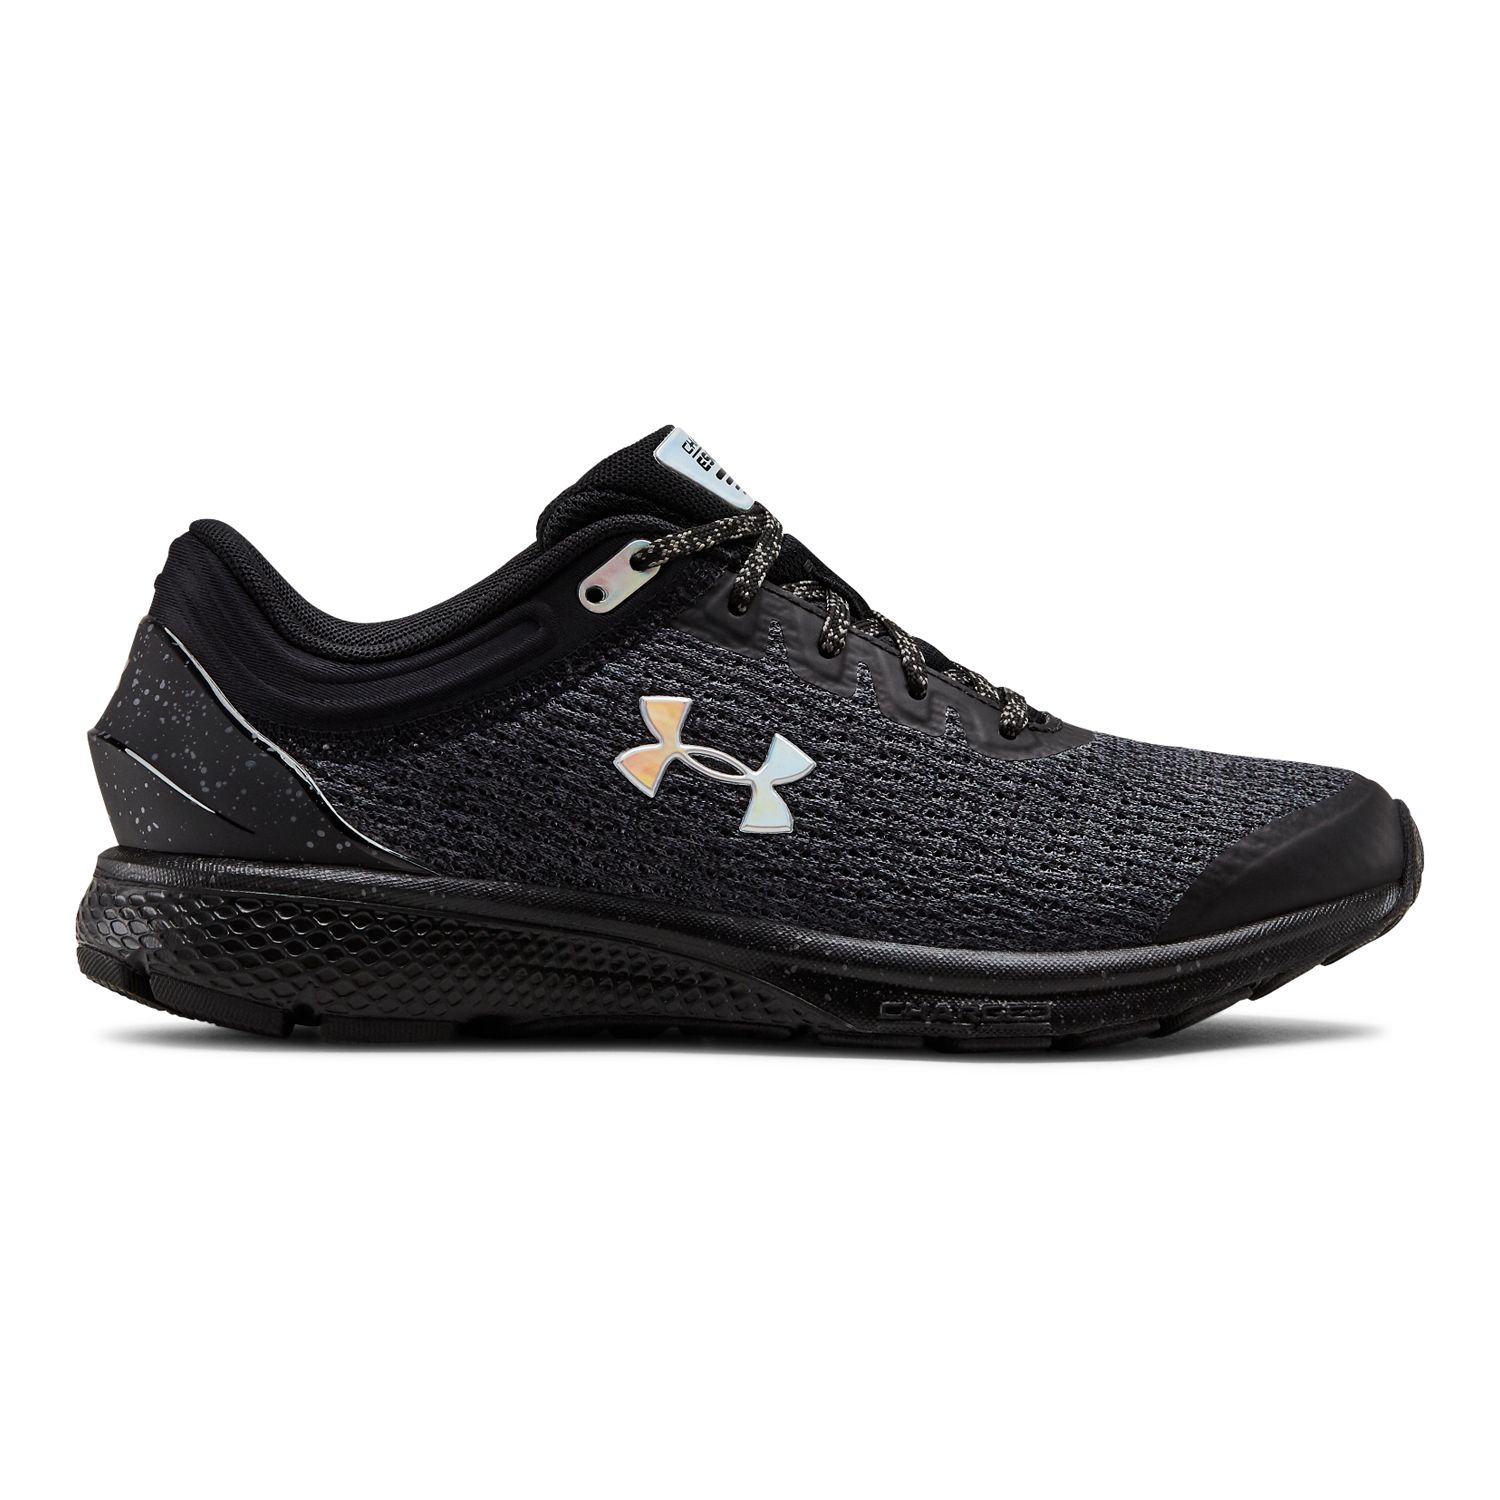 under armour women's slip on shoes